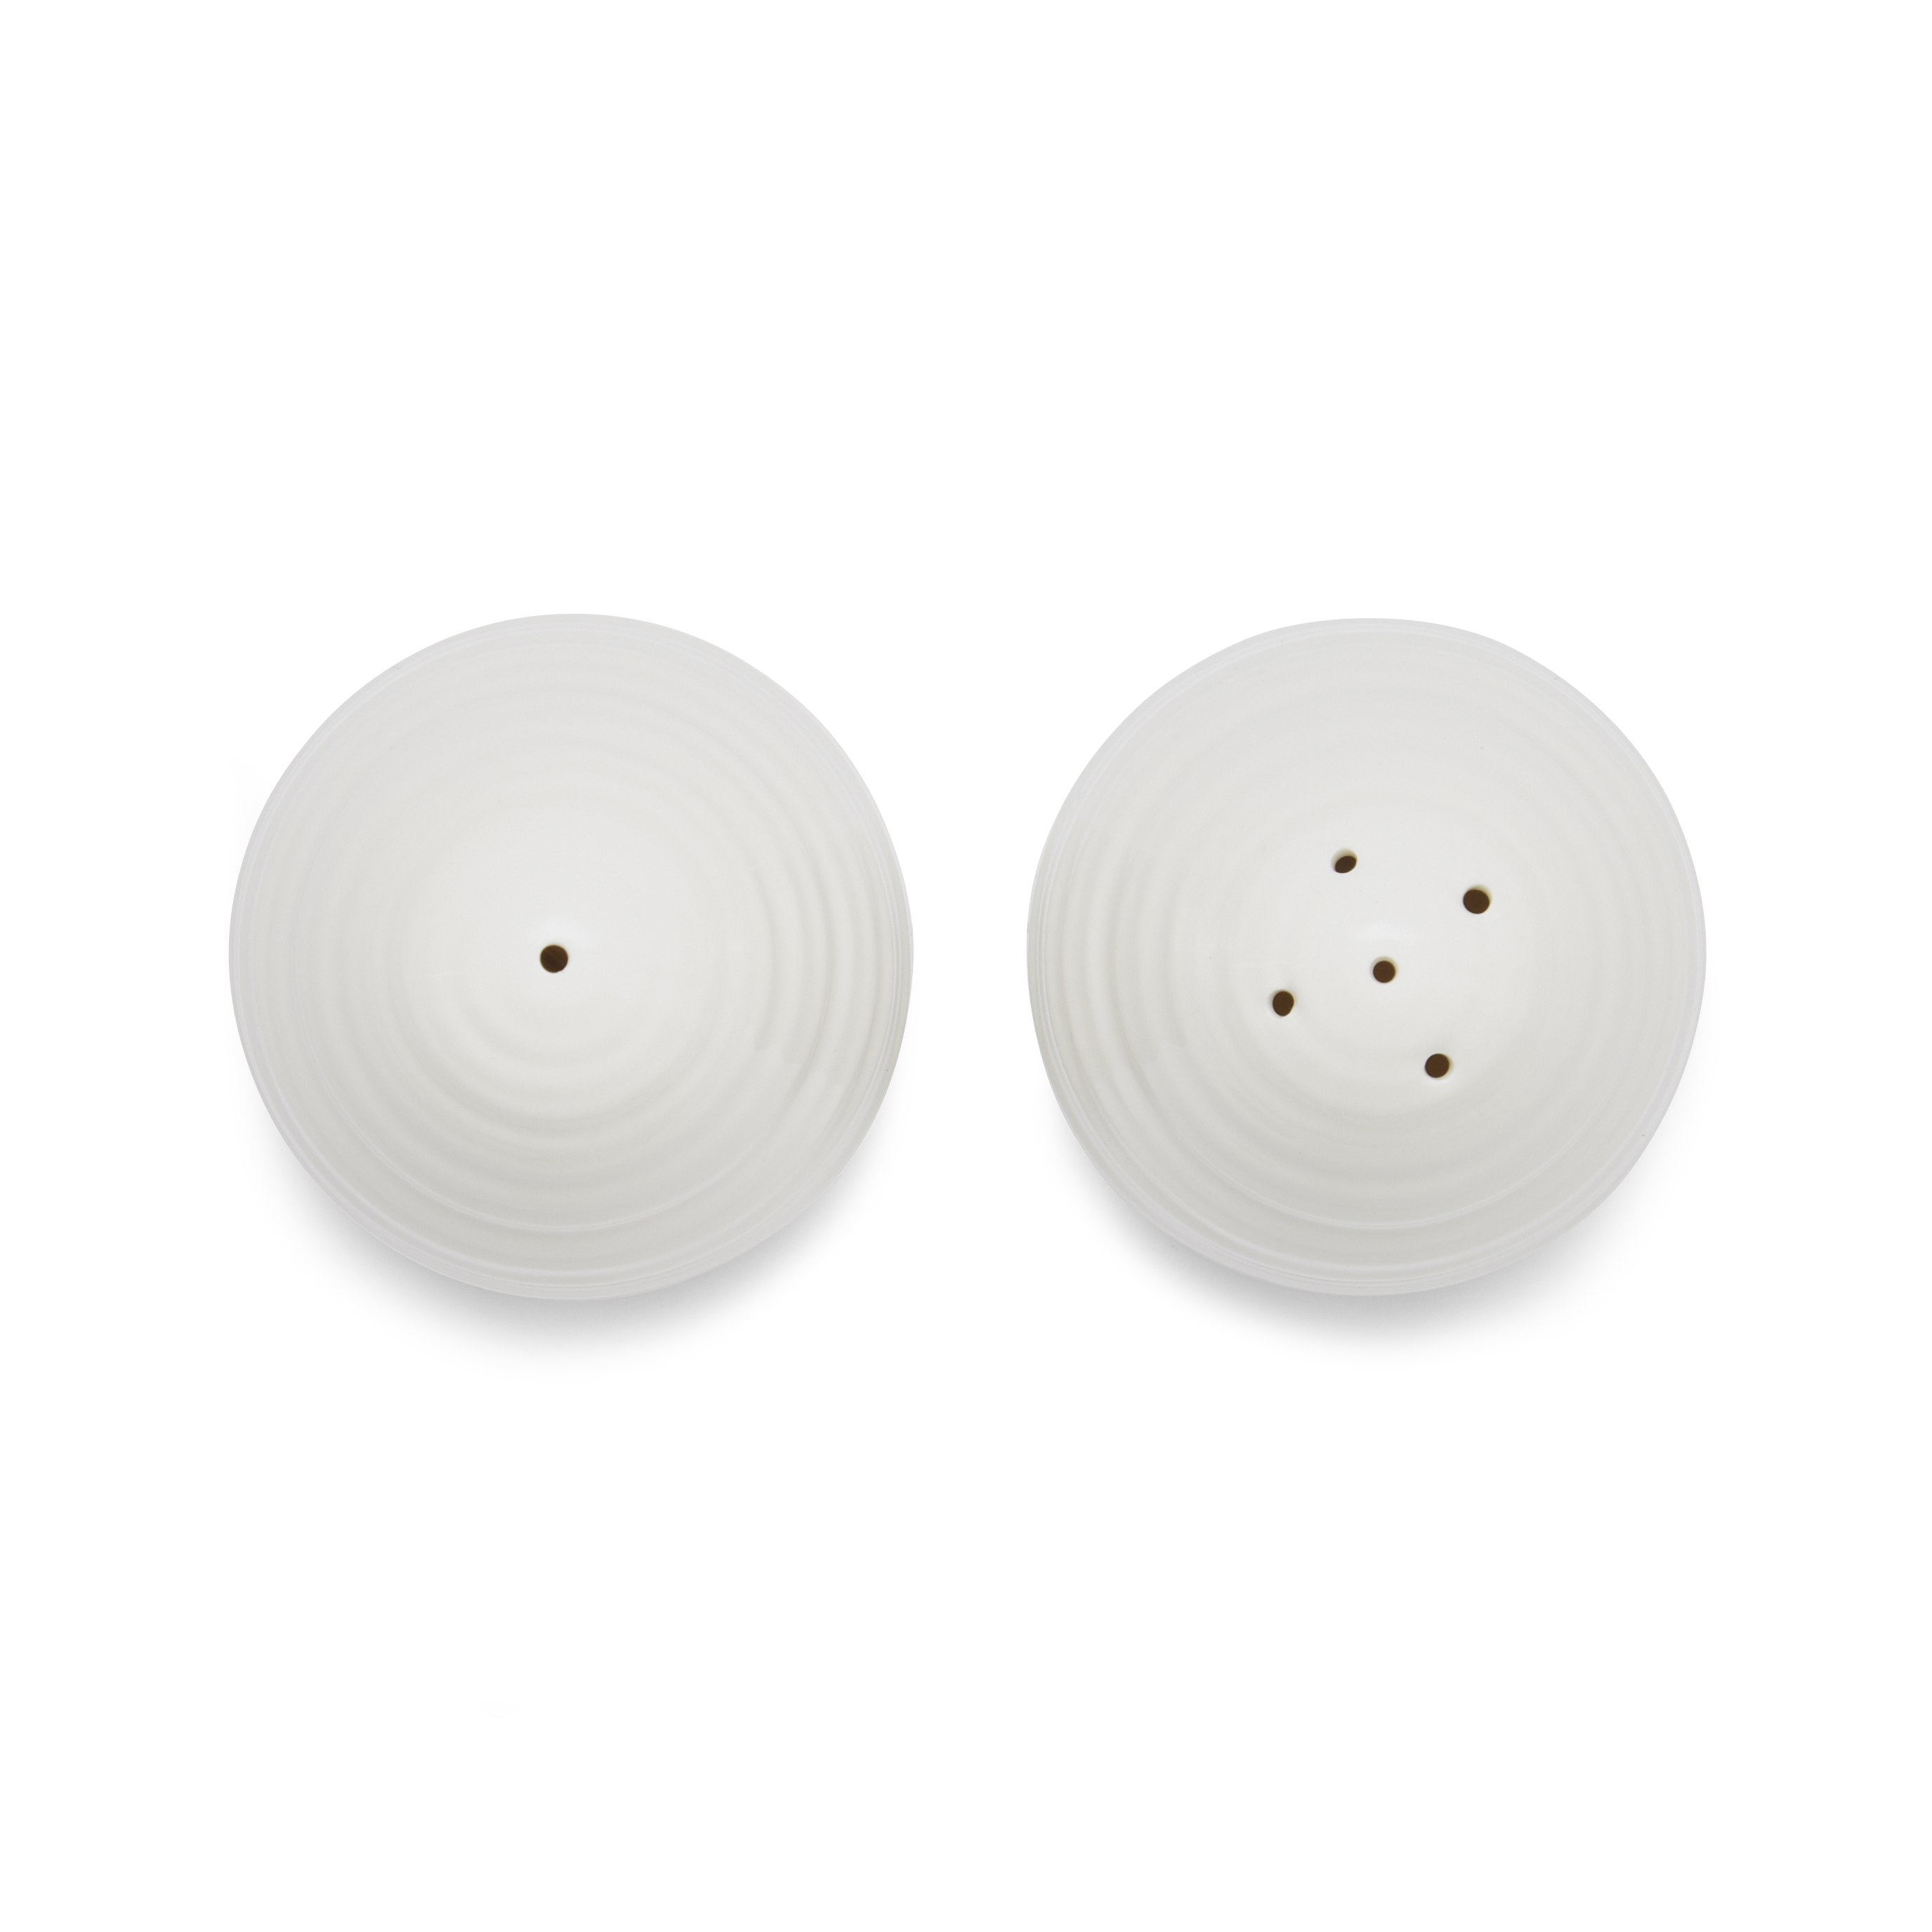 Sophie Conran for White Salt and Pepper Set image number null